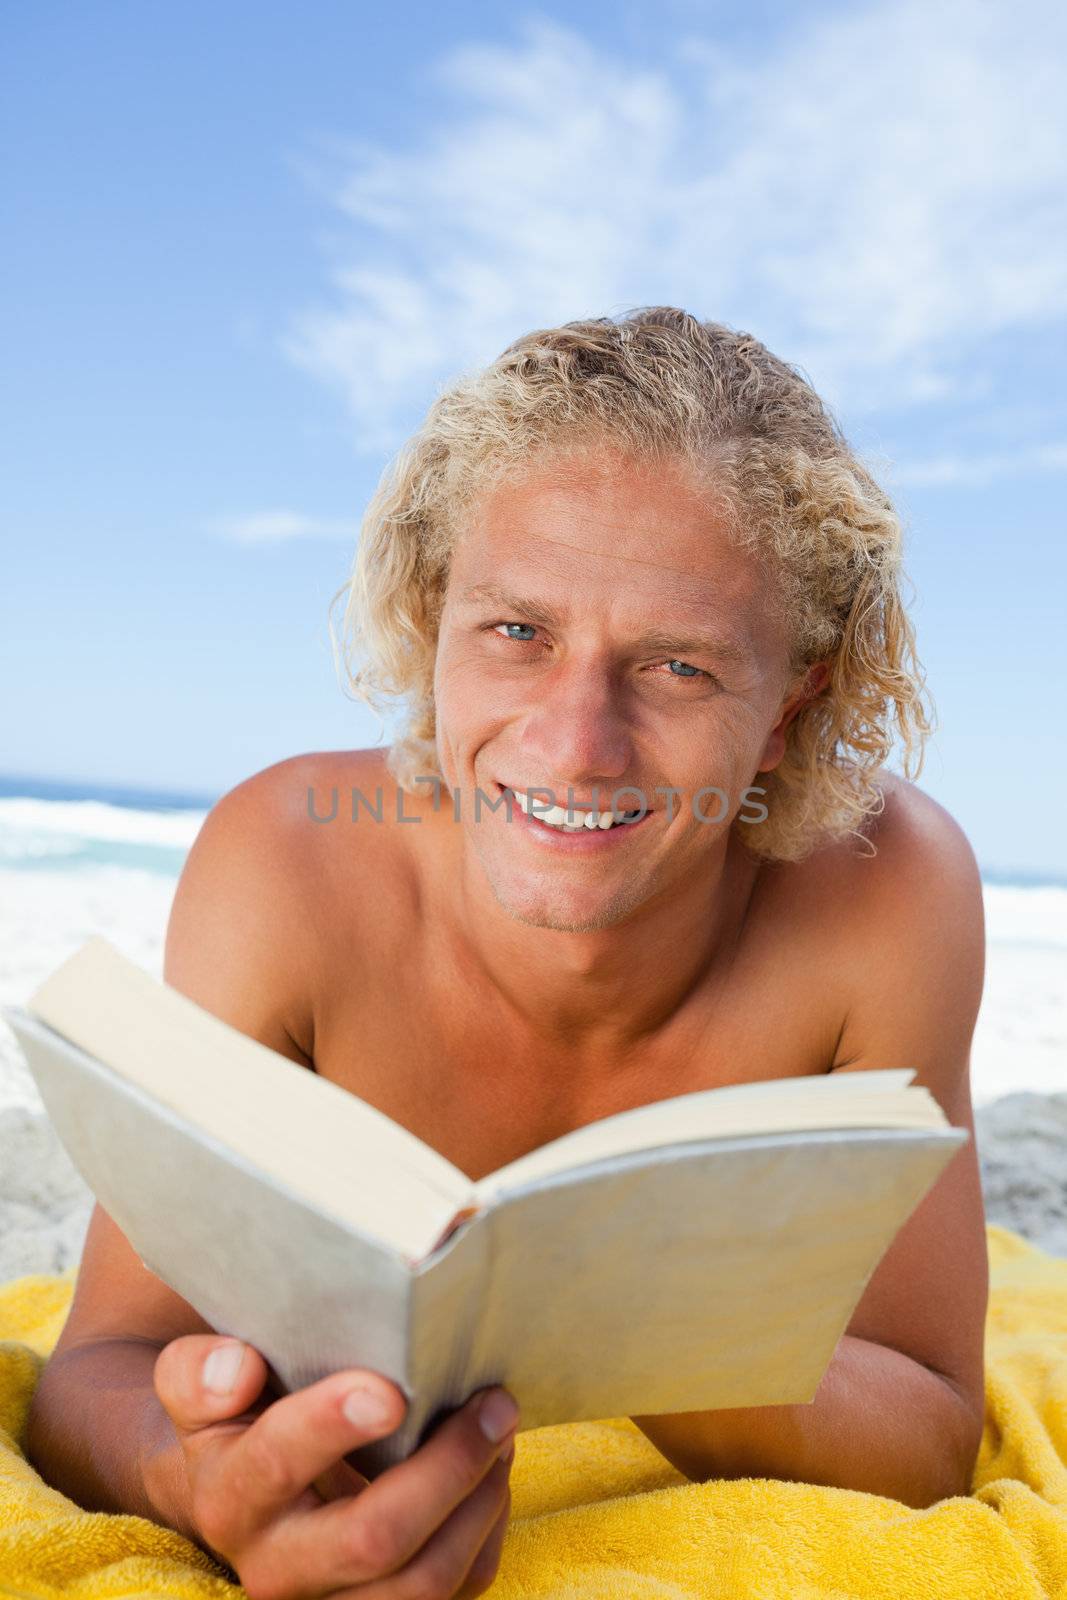 Smiling blonde man reading a book while lying on the beach by Wavebreakmedia